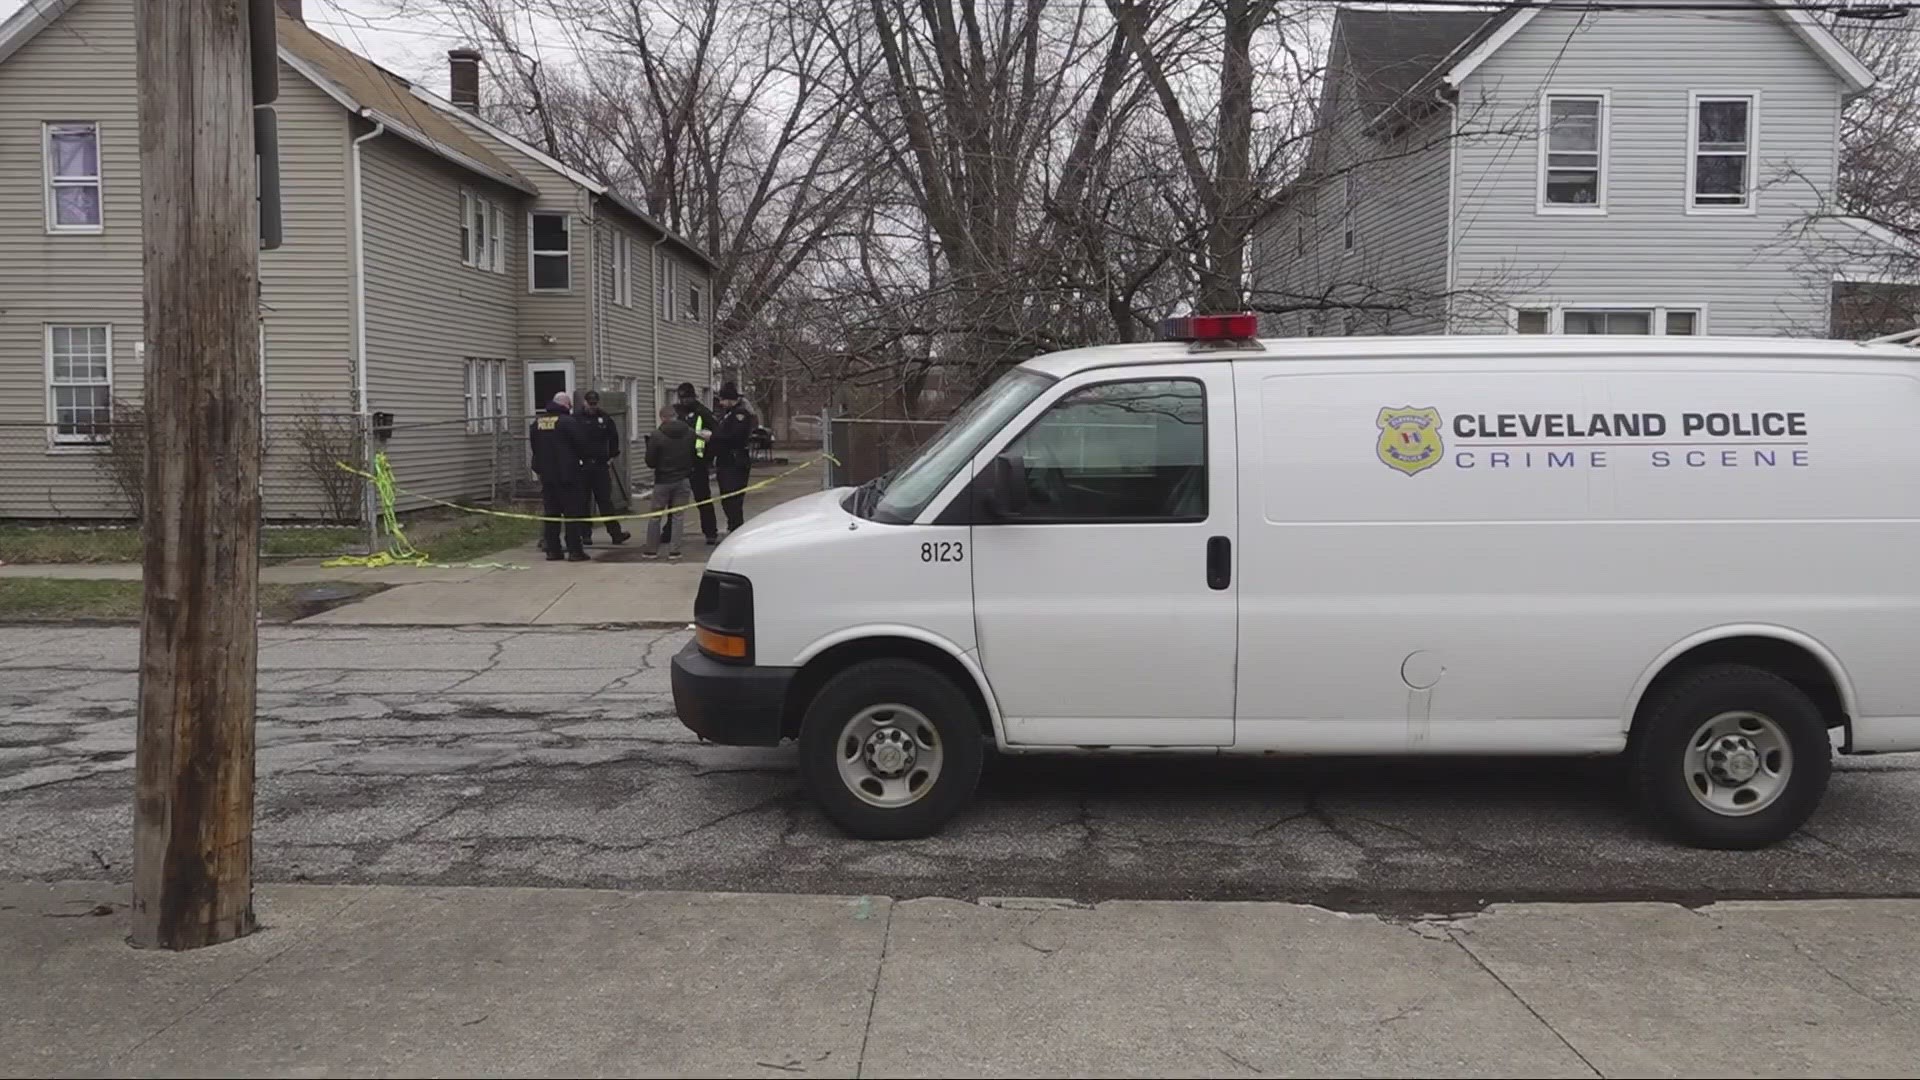 Cleveland police say it's possible the boy accidentally shot himself after finding the firearm.